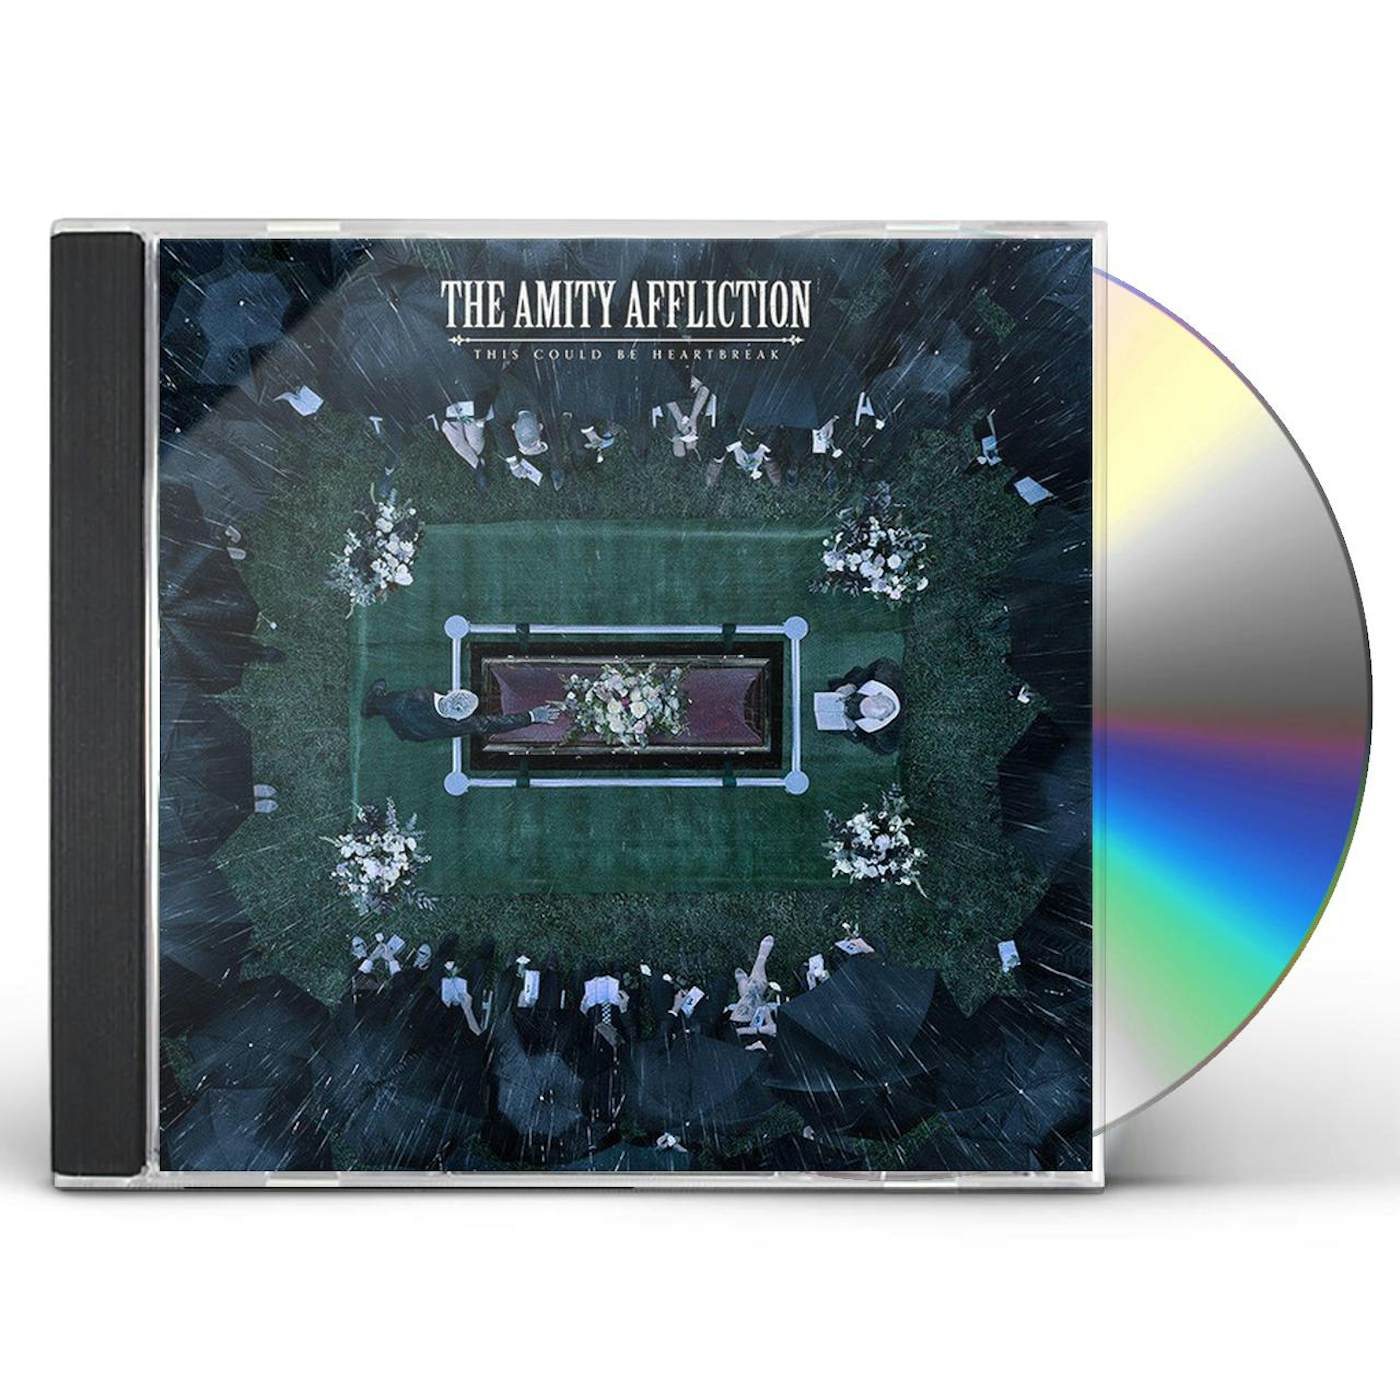 The Amity Affliction THIS COULD BE HEARTBREAK CD